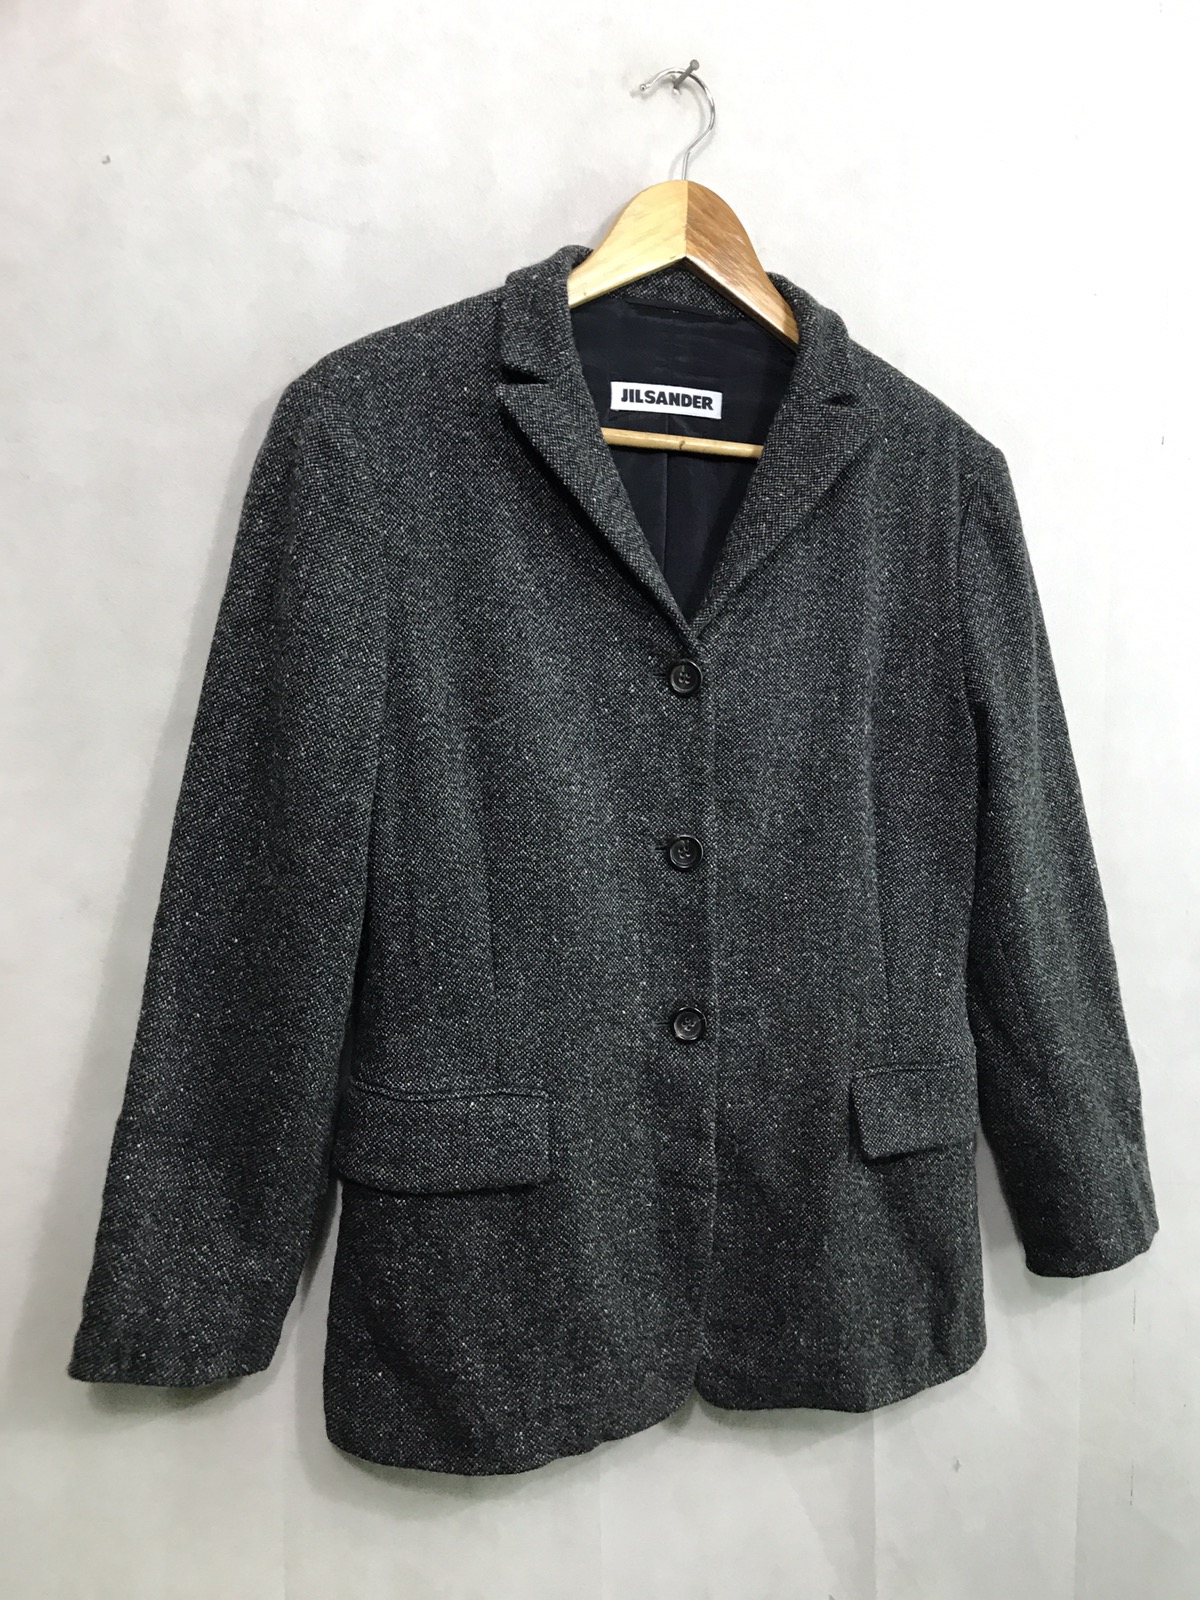 Jacket made in germany - 2